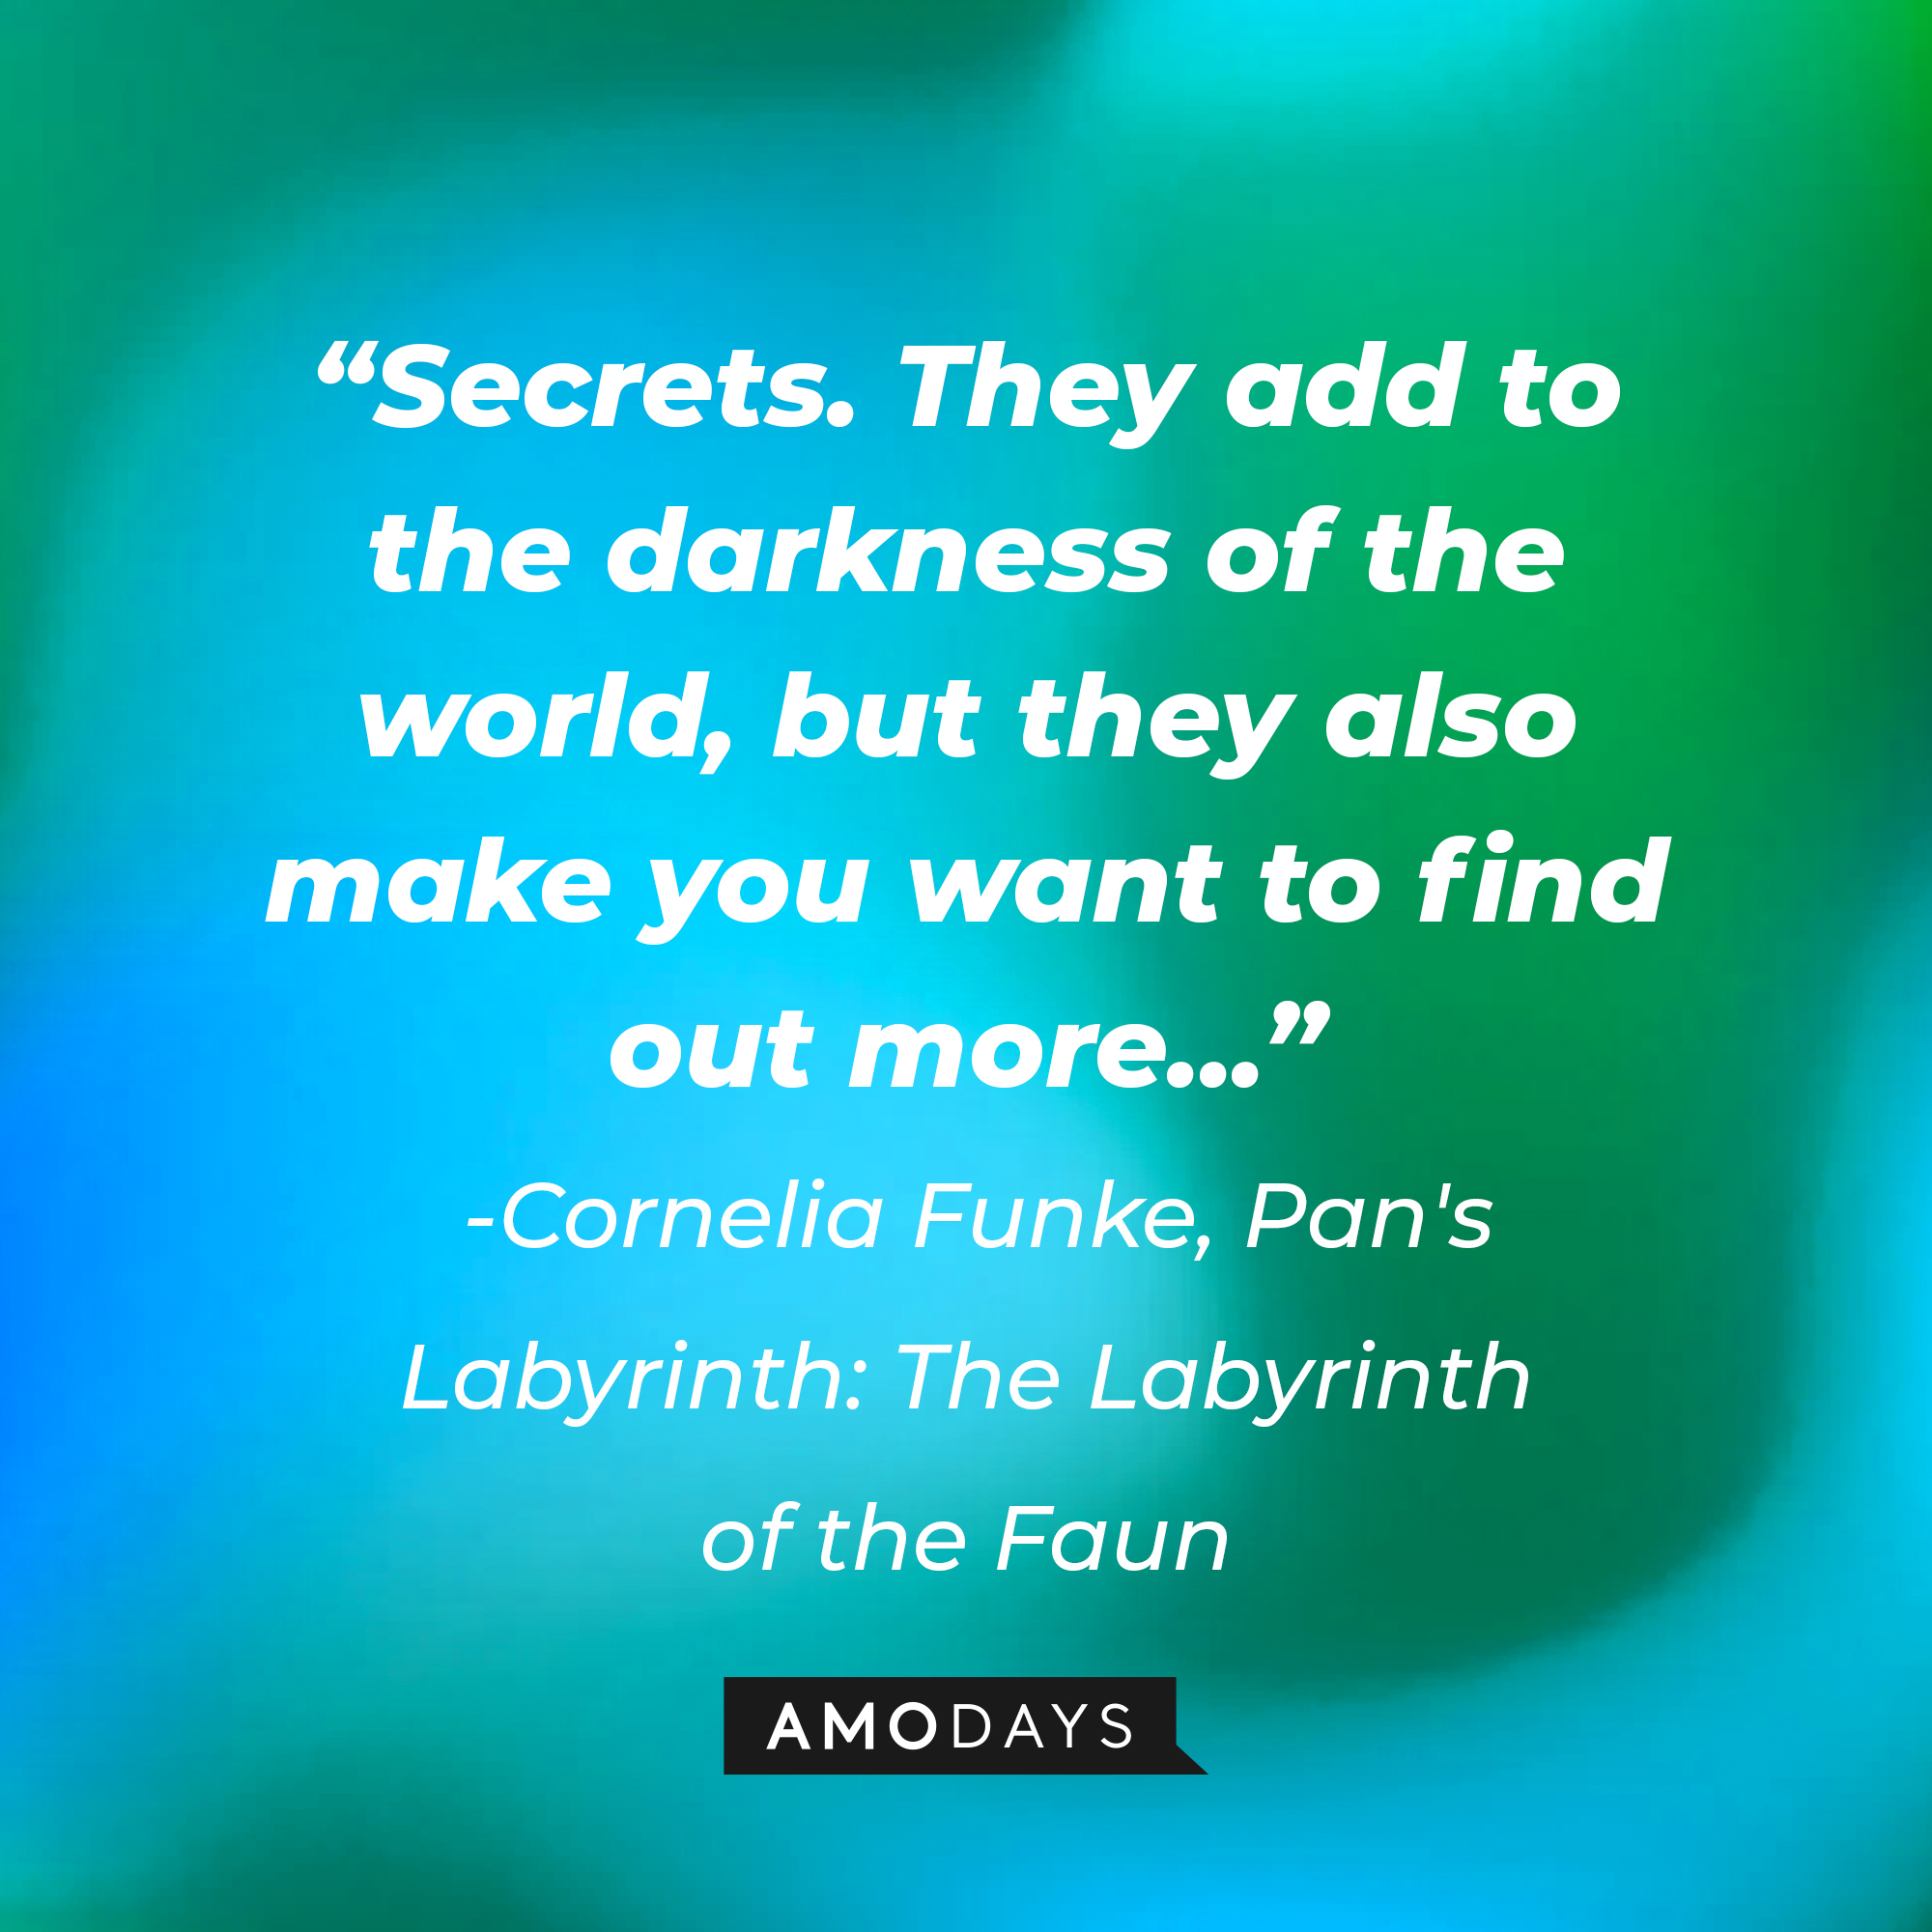 Cornelia Funke's quote: "Secrets. They add to the darkness of the world, but they also make you want to find out more..."  | Image: Amodays